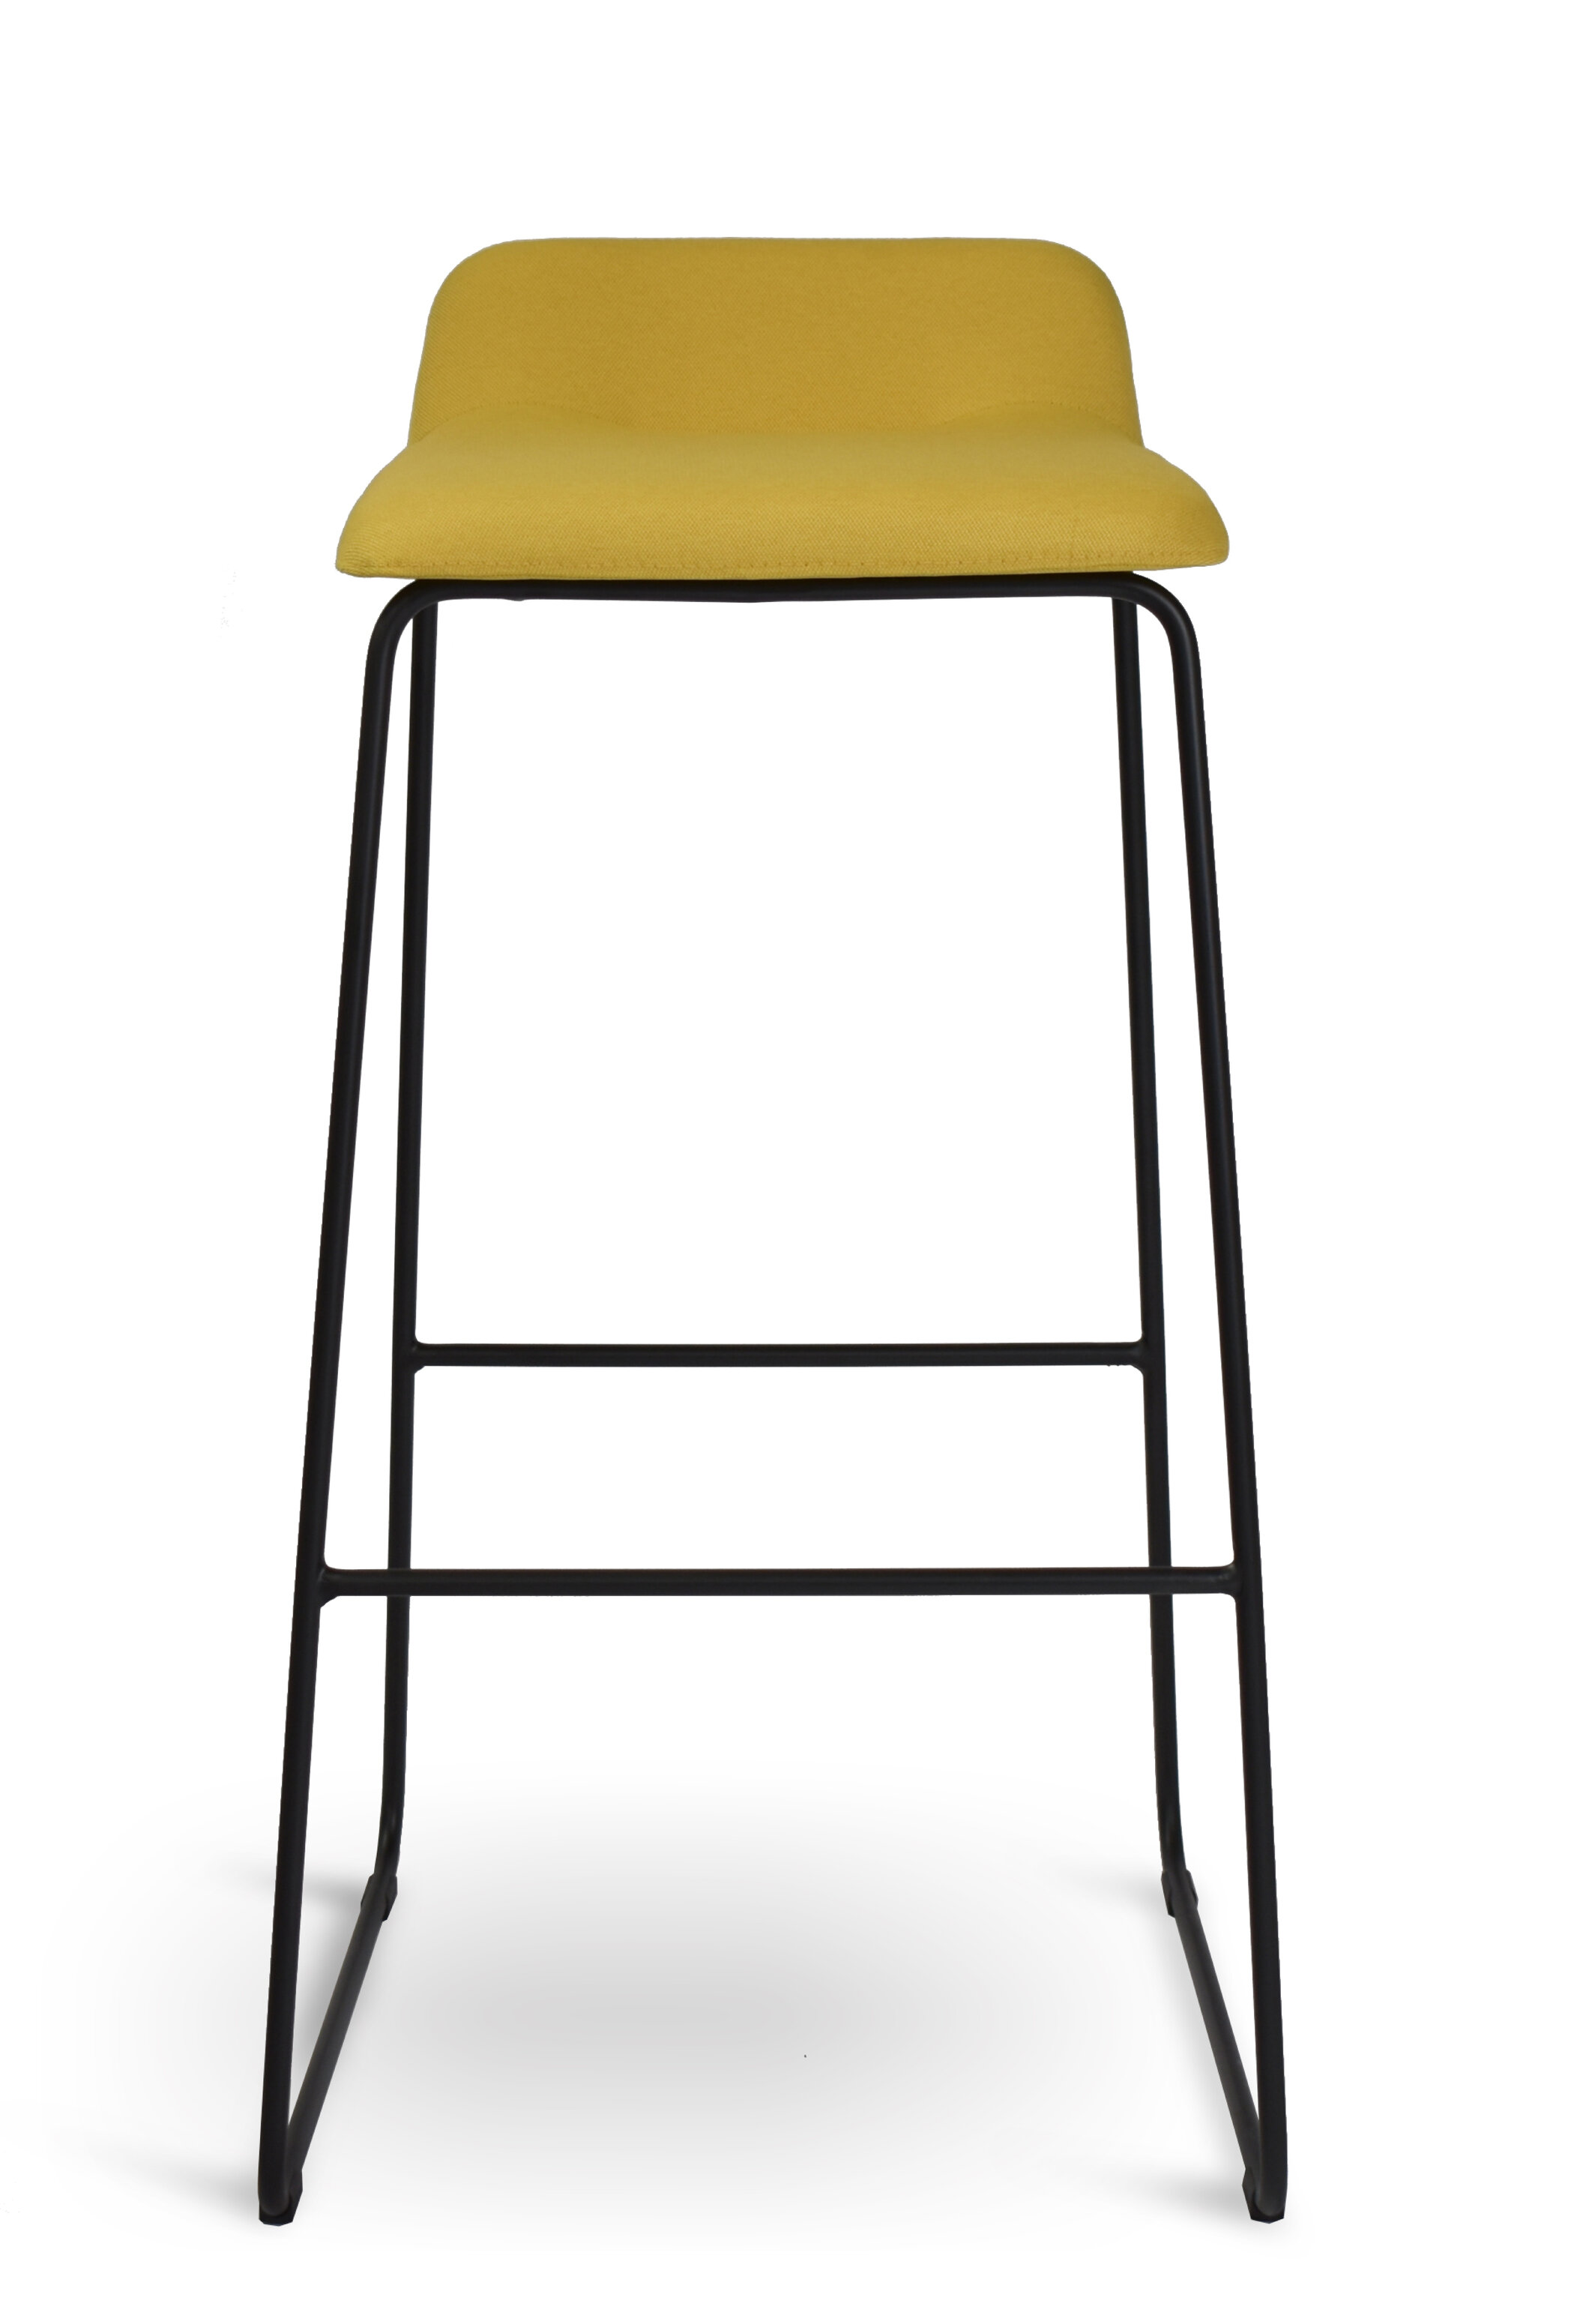 WS - Lolli High Stool - Yellow Upholstered (Front)